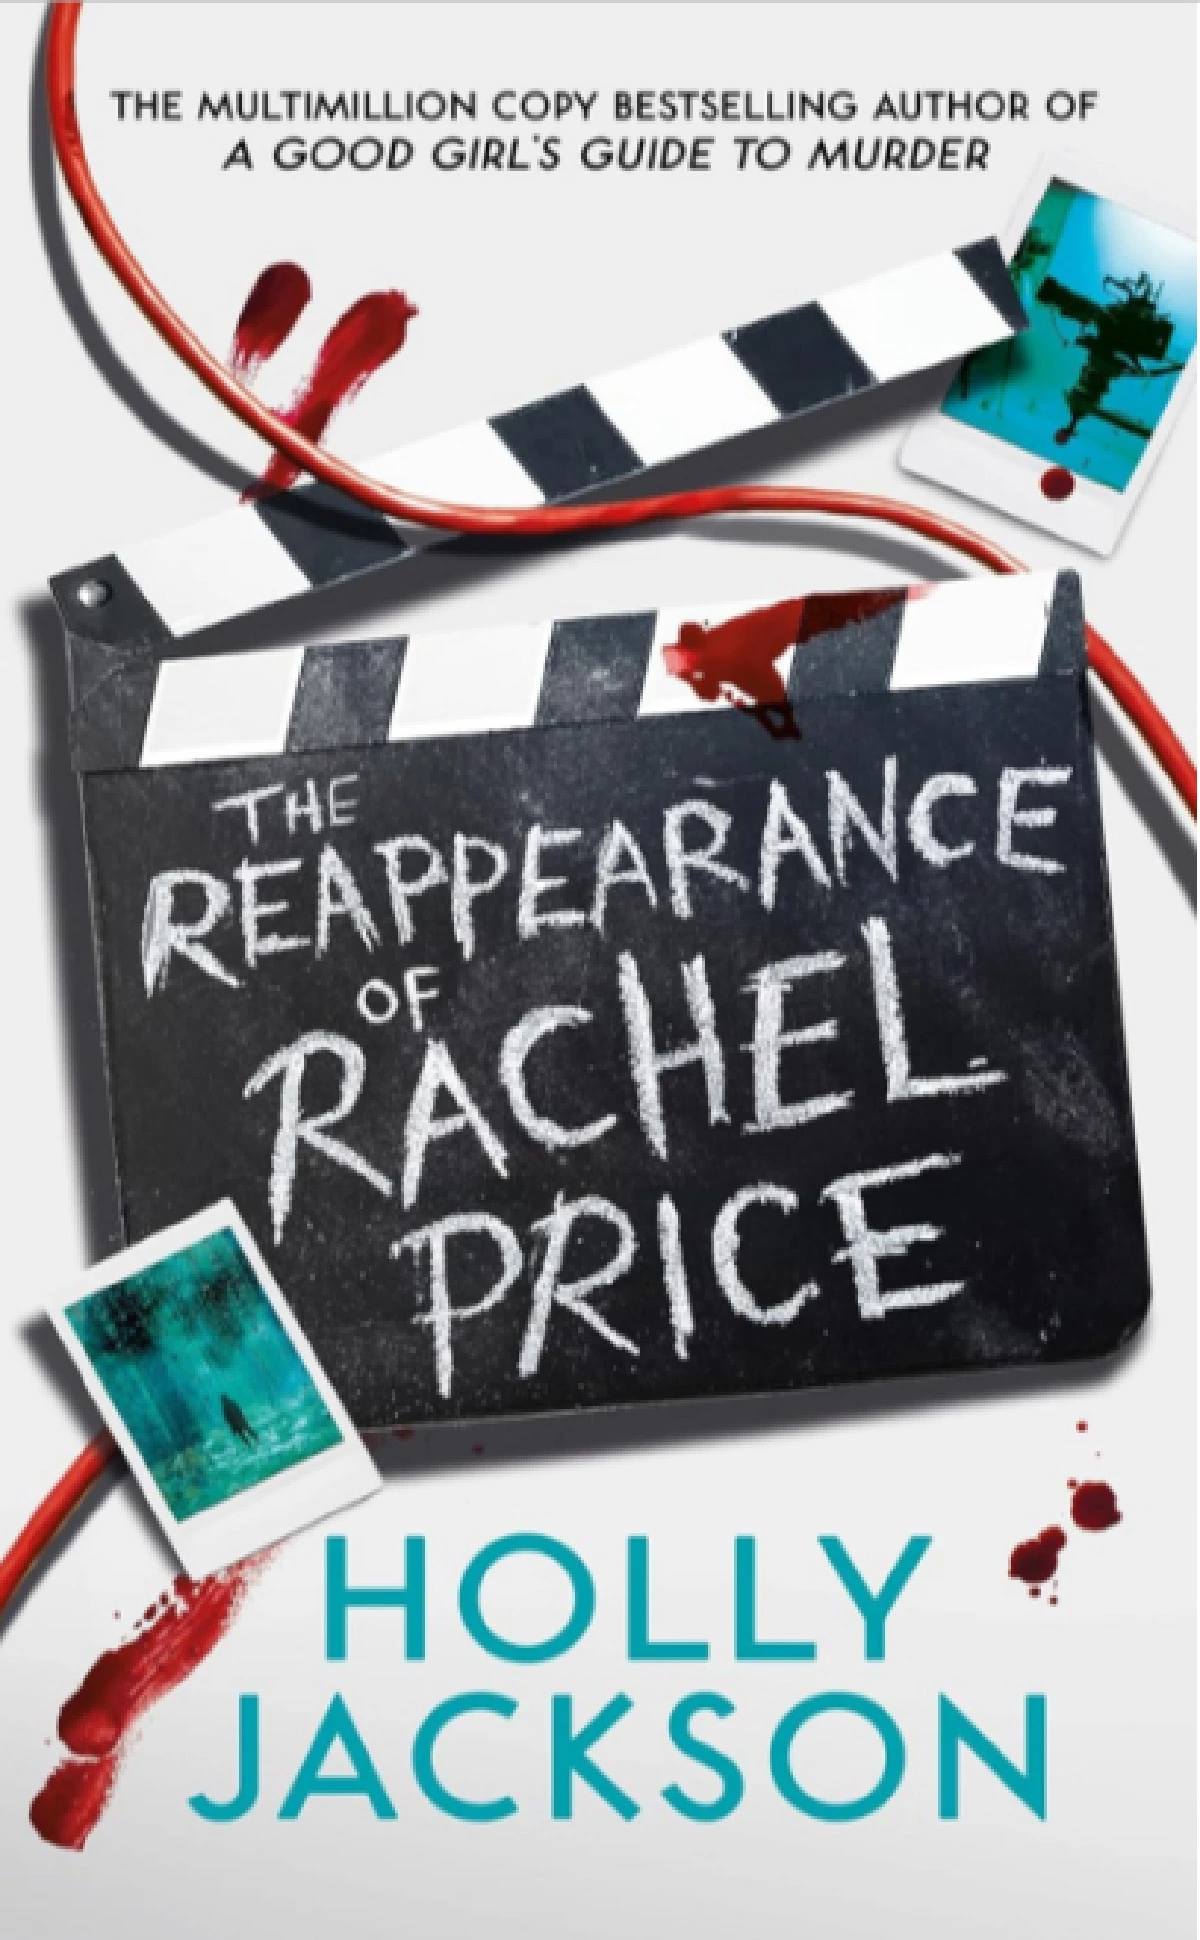 The Reappearance of Rachel Price Book by Holly Jackson